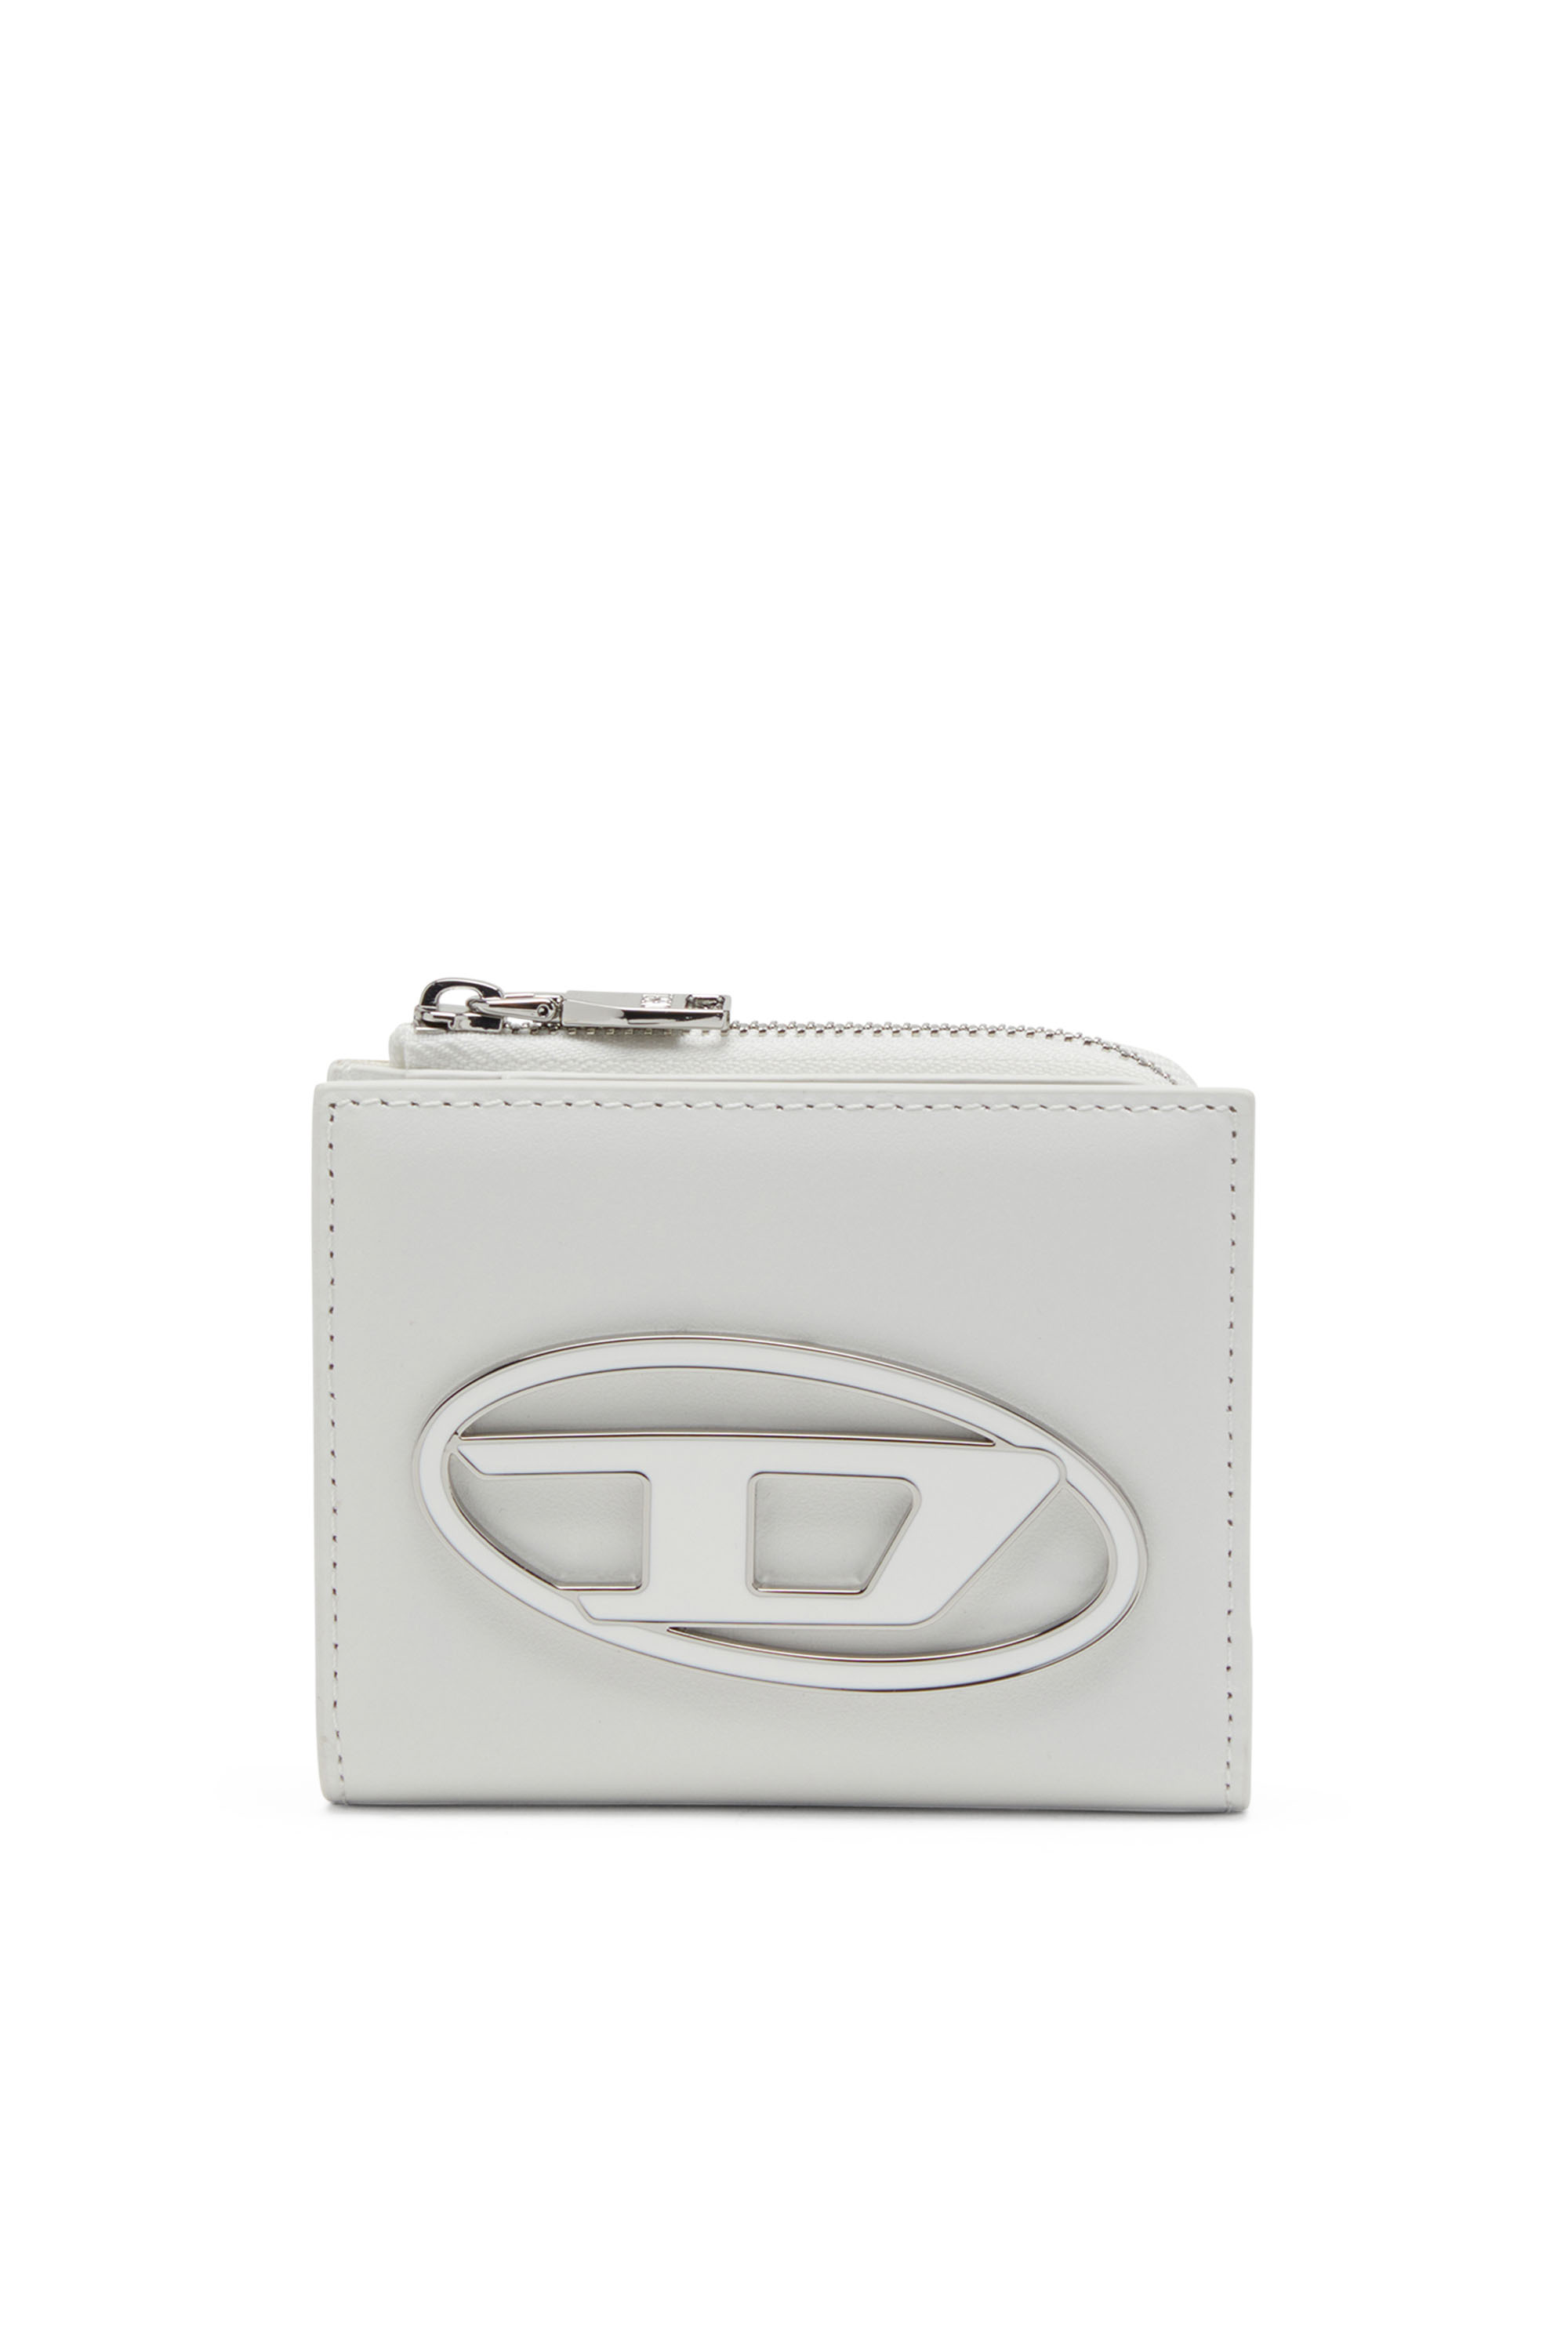 Diesel - 1DR CARD HOLDER ZIP L, Donna Portacarte a libro in nappa in Bianco - Image 1